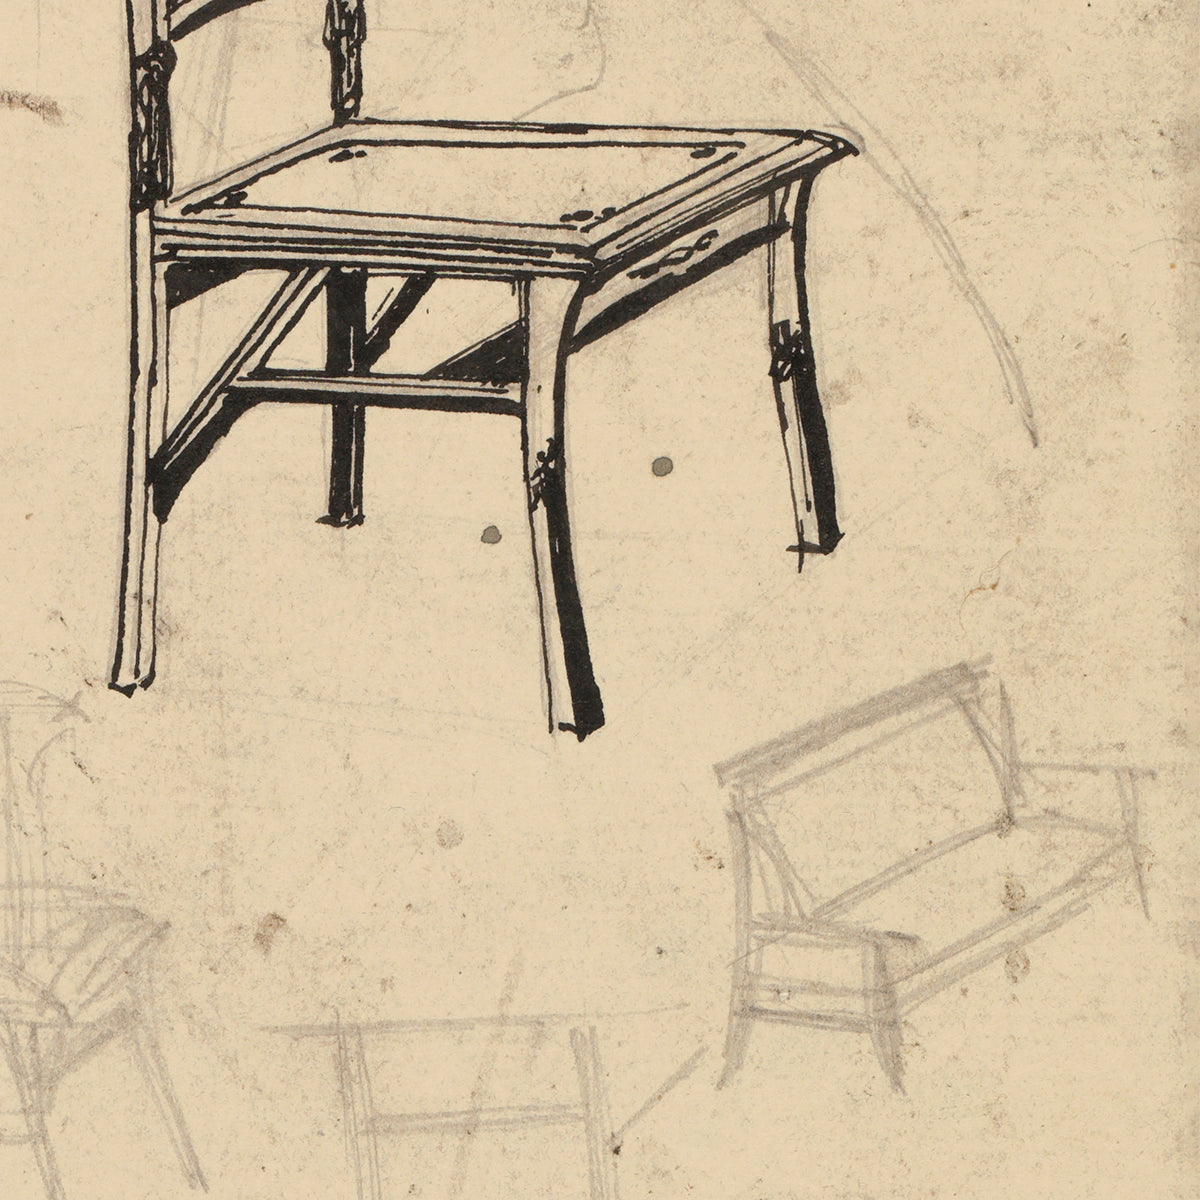 DESIGN FOR A CHAIR I